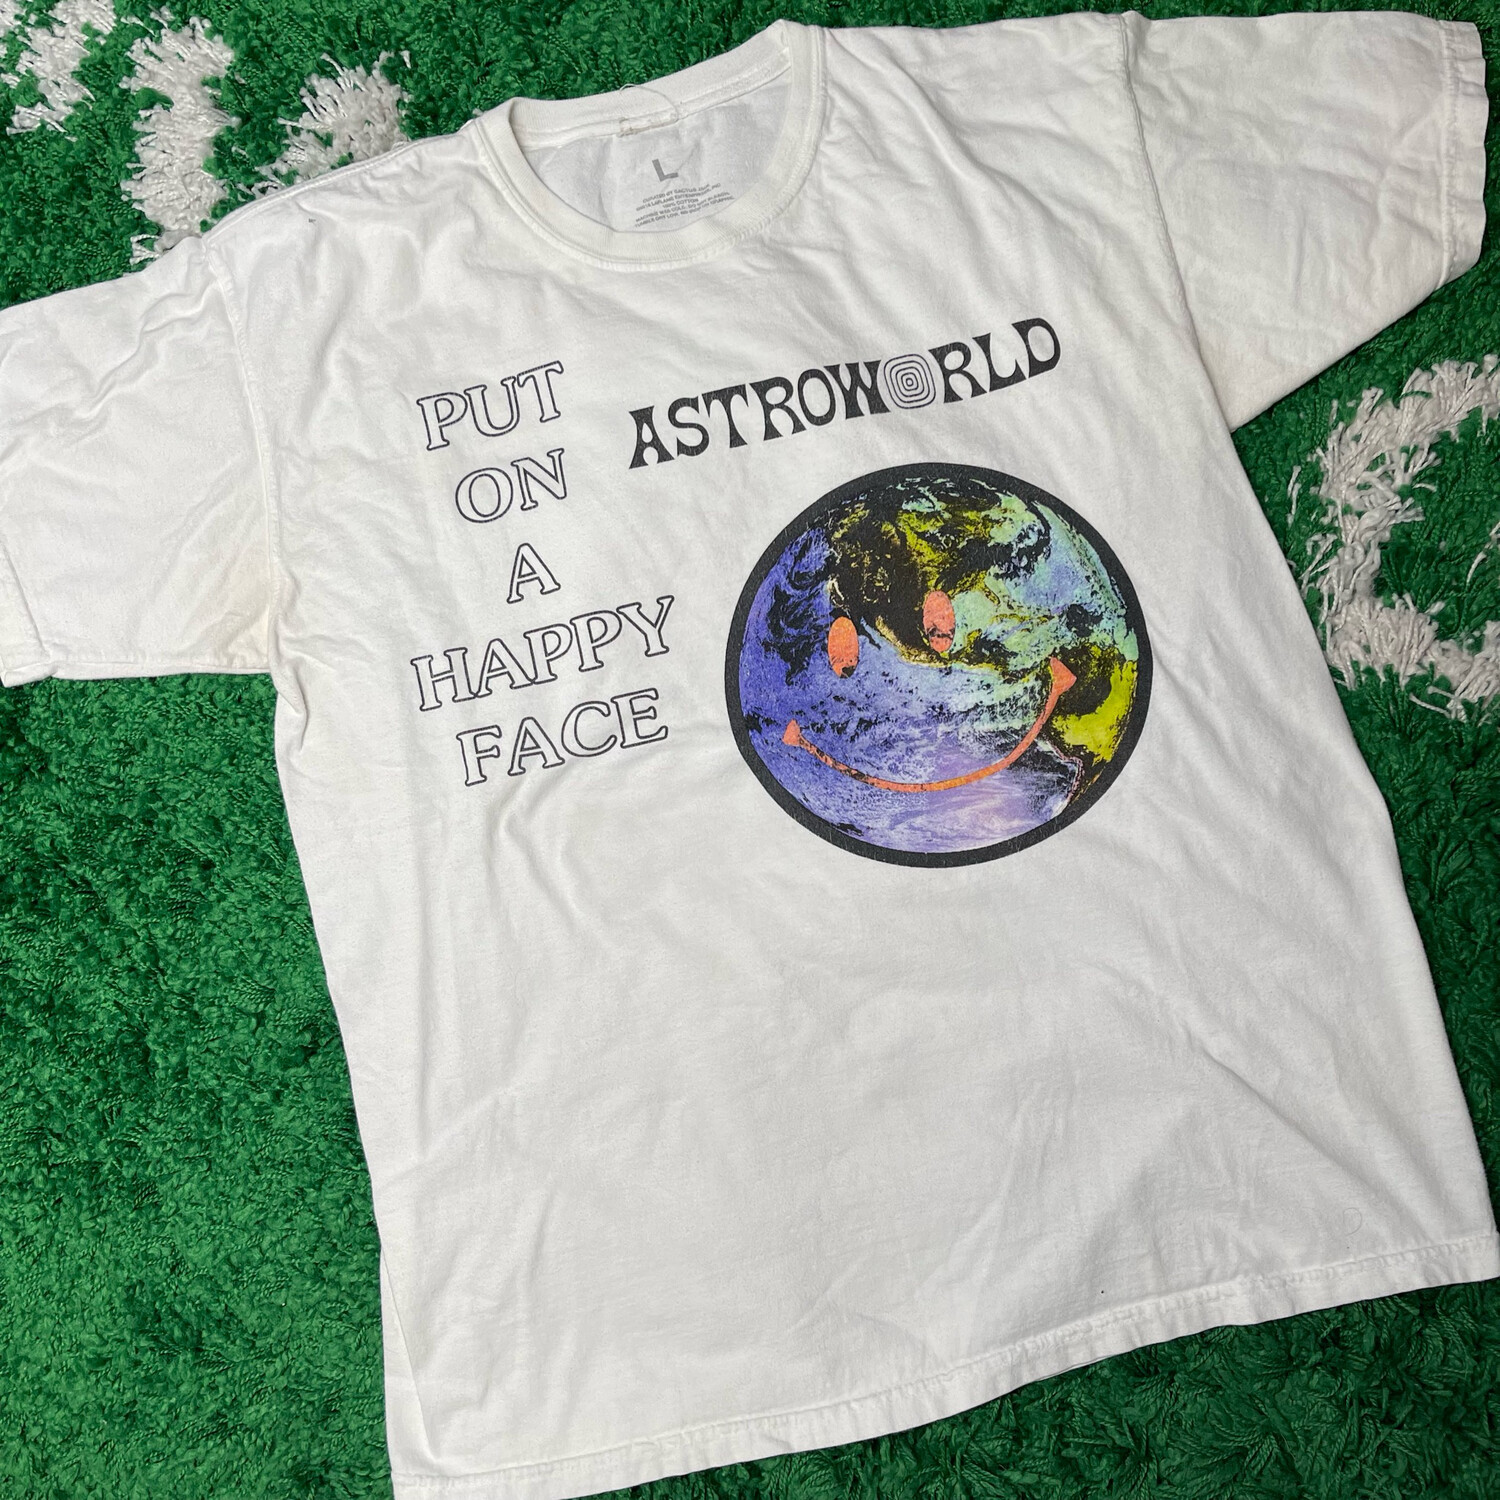 Travis Scott Astroworld Happy Face Tee White Size Large